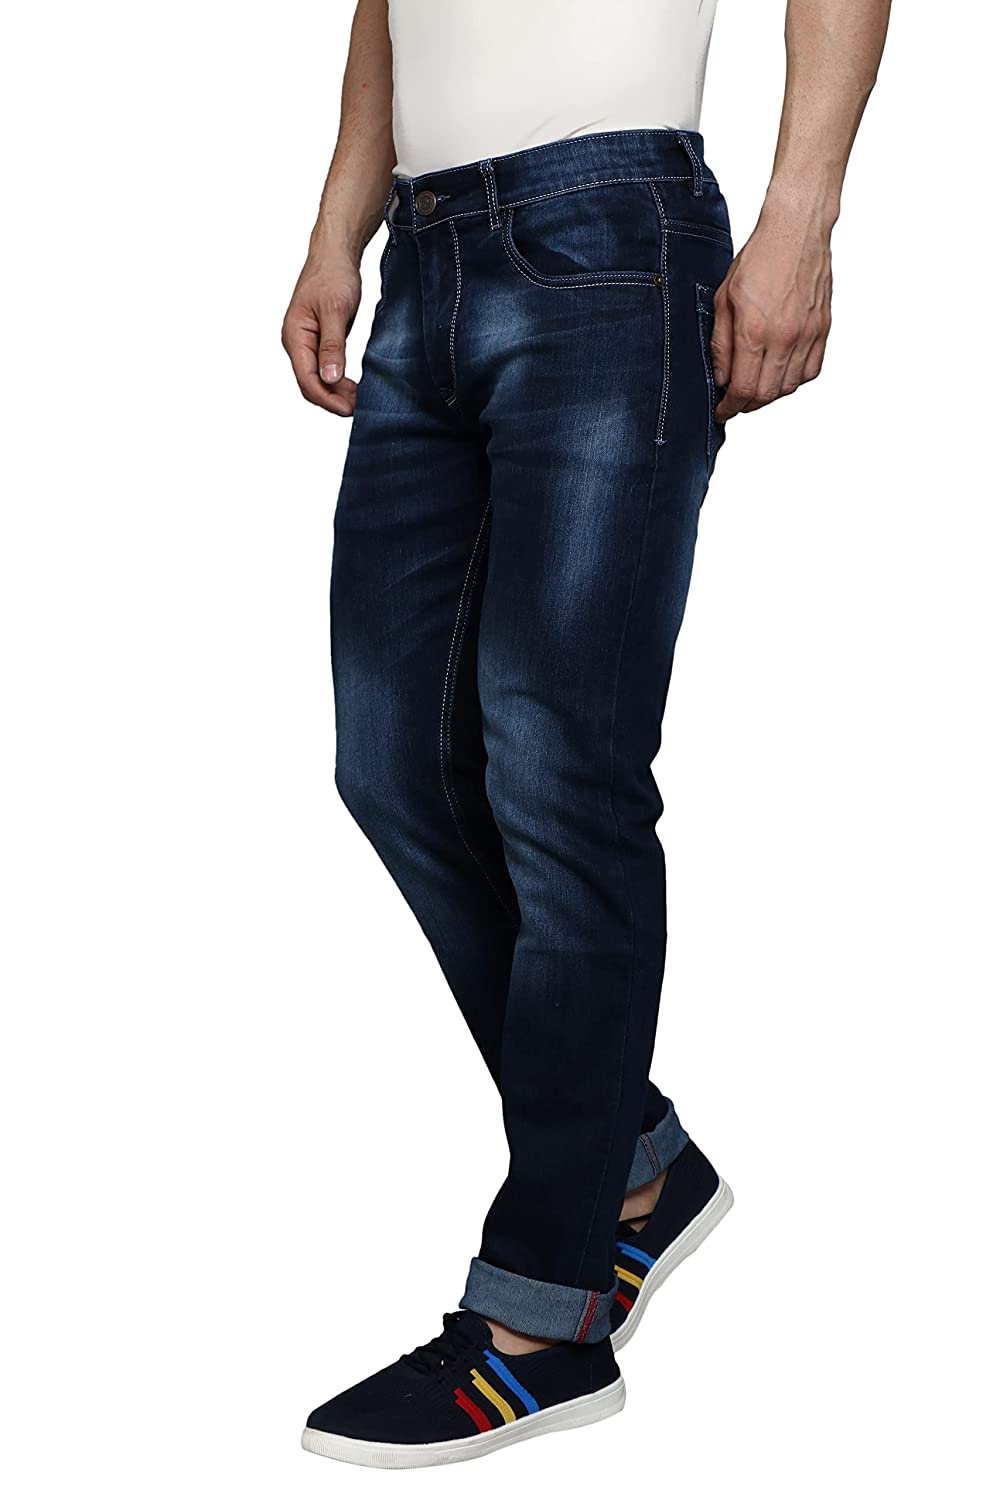 City Touch Knitted Denim Men Slim Fit Jeans, Design/Pattern: Faded, Waist  Size: 28 - 34 Inch at Rs 580/piece in Kolkata